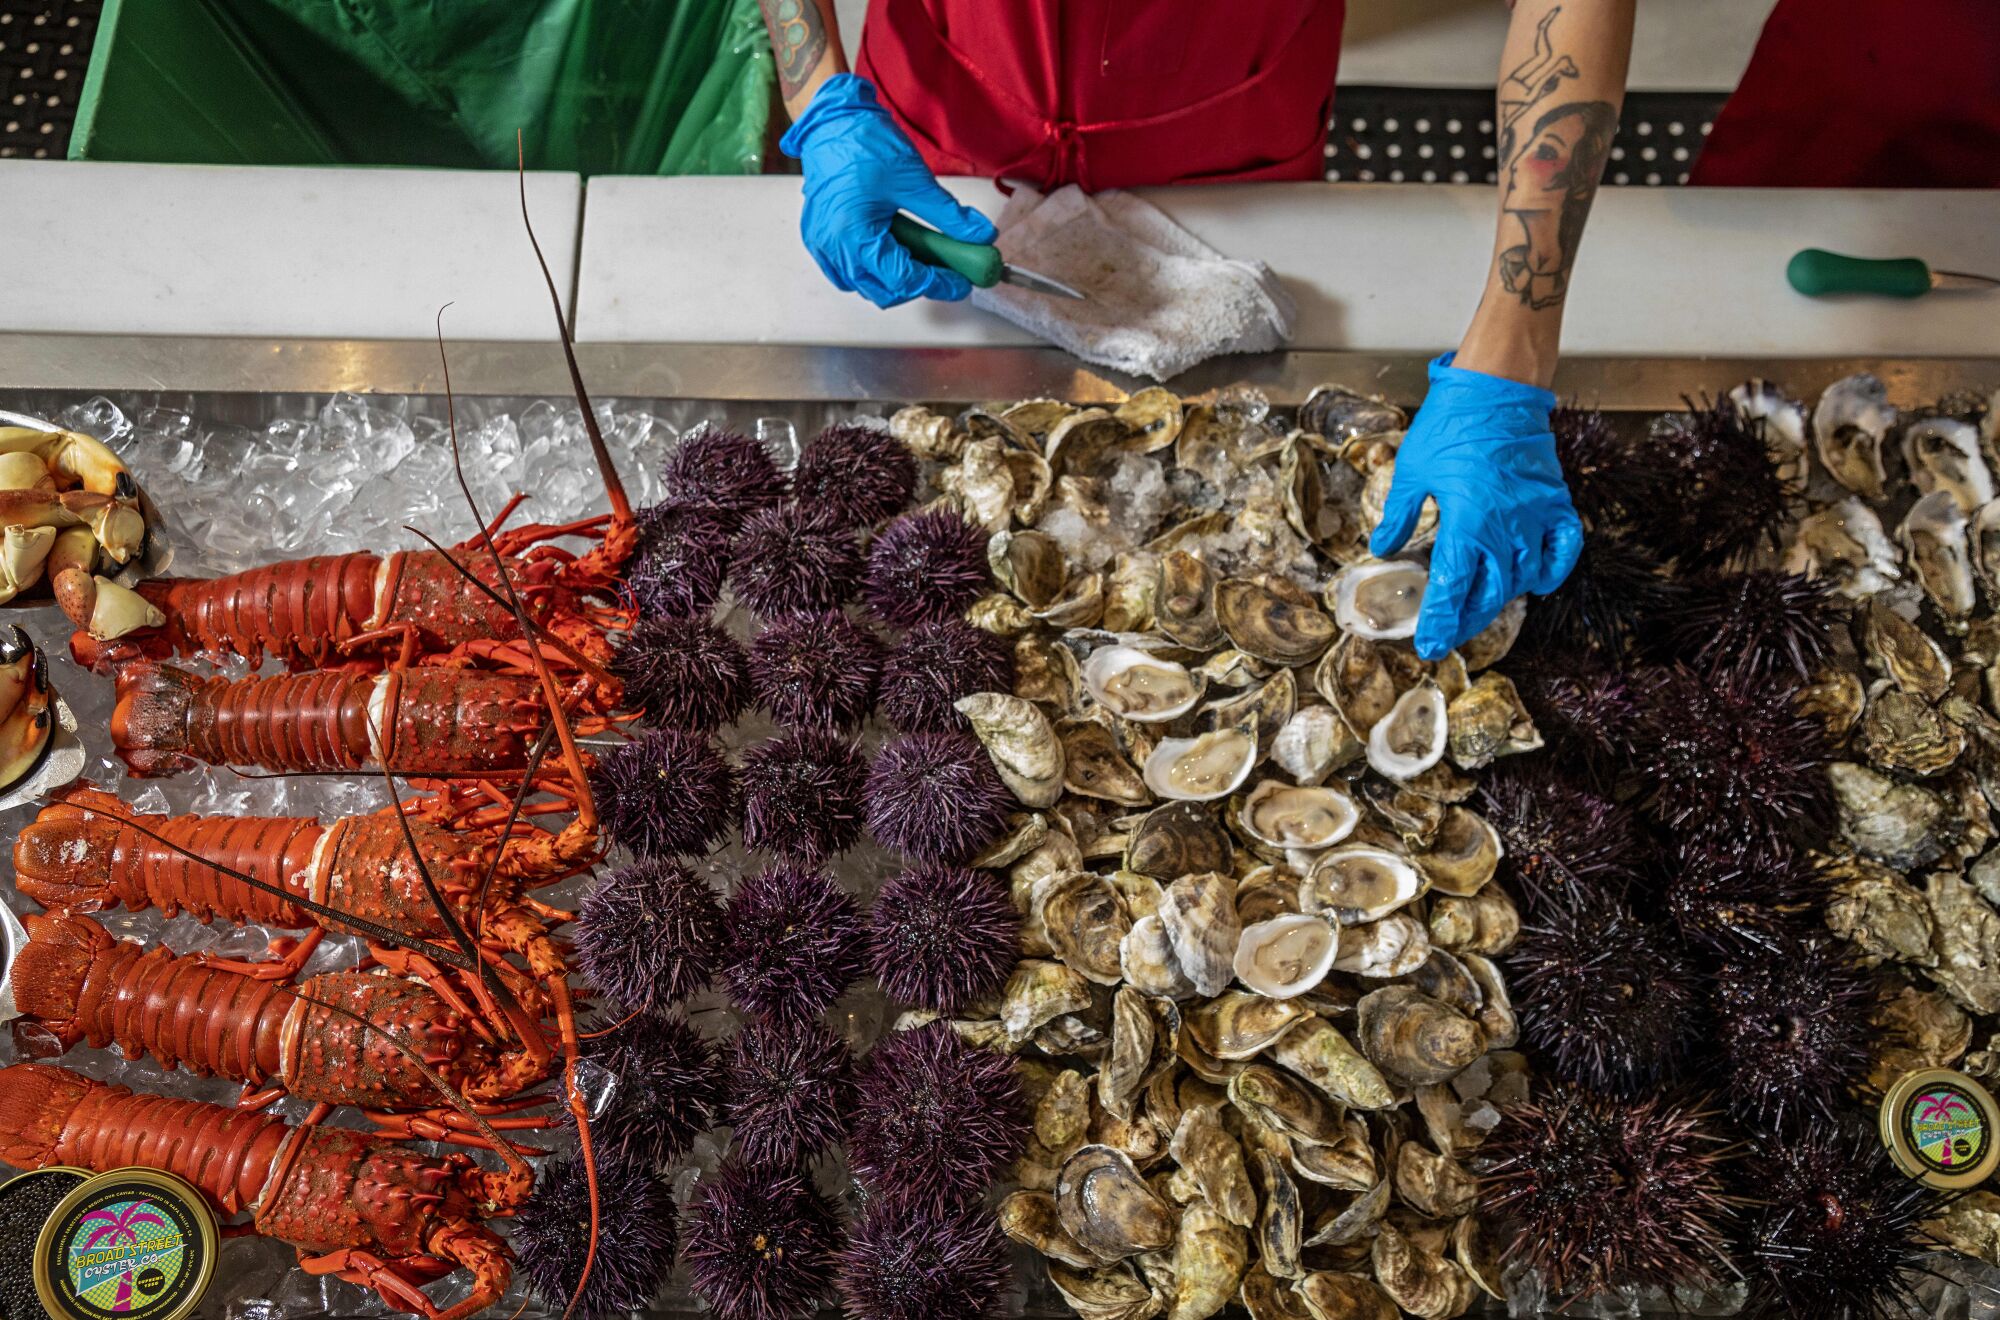 Rubber-gloved hands grab oysters resting among purple urchins and other sea creatures on a bed of ice 